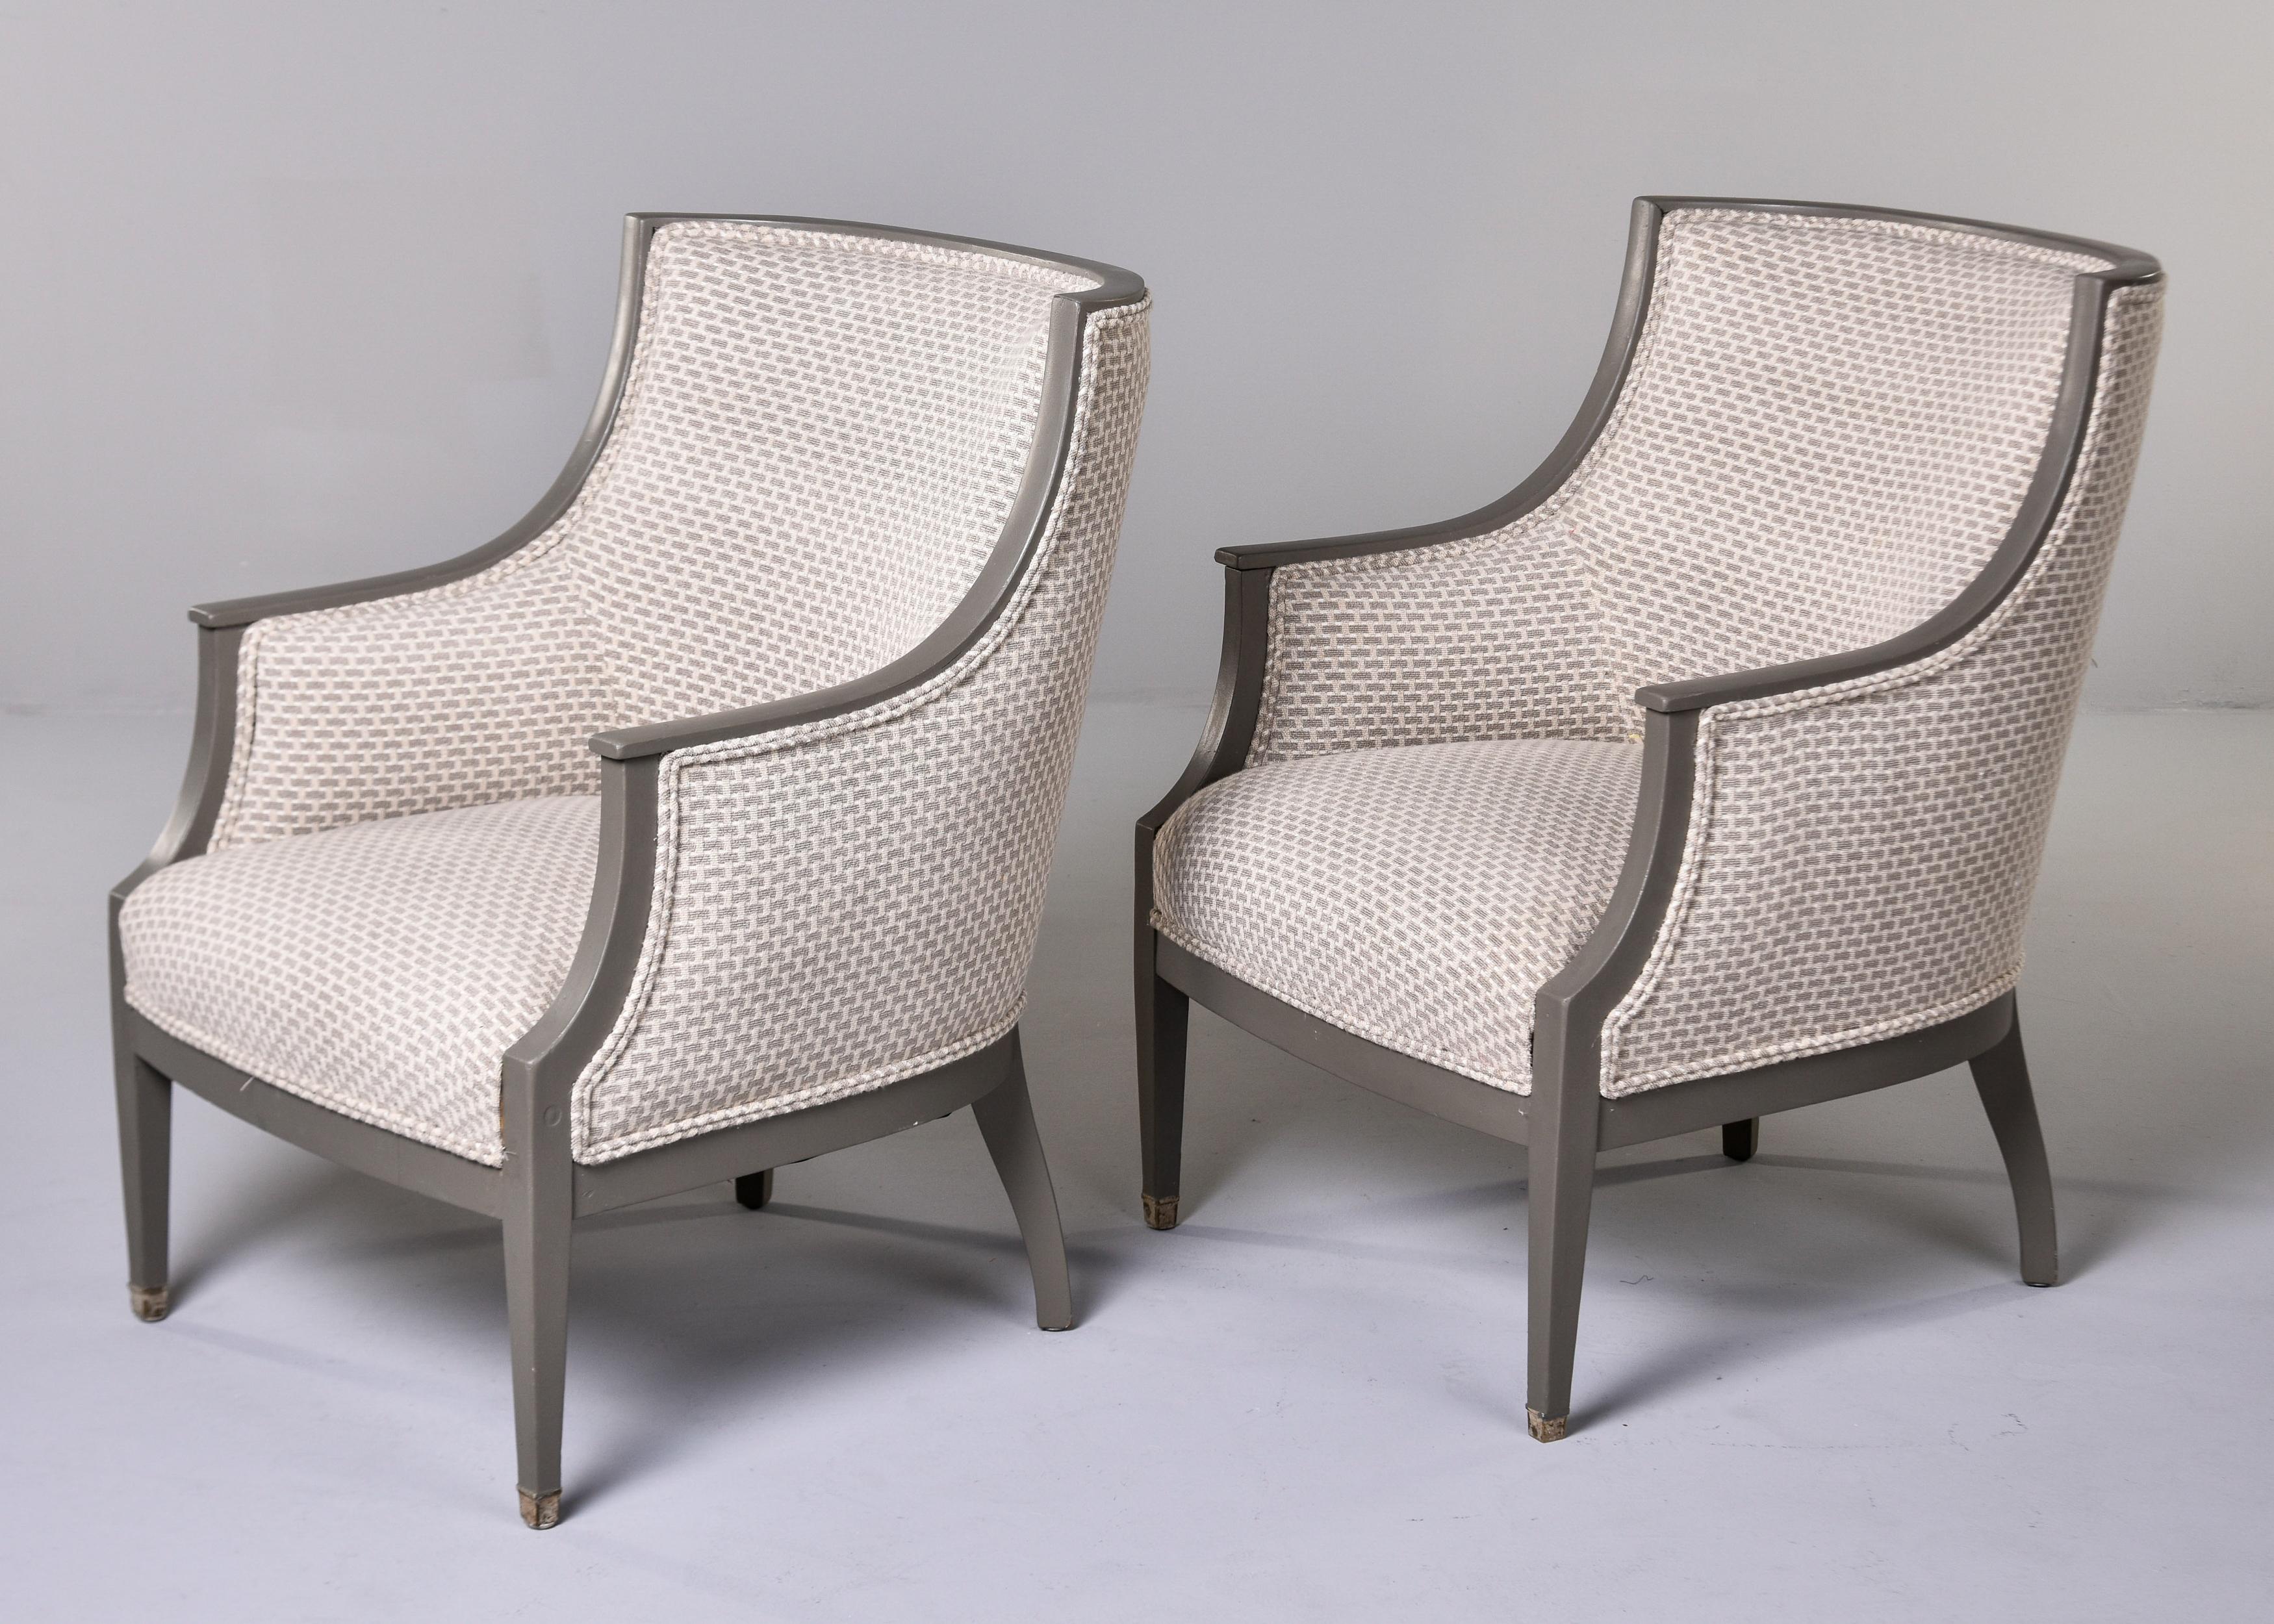 Found in Europe, this pair of Swedish chairs date from the 1930s. Wood frames have a painted finish in a shade of greige. Chairs have been newly upholstered in a cream colored chenille with an all-over, raised, basket-weave style pattern in greige